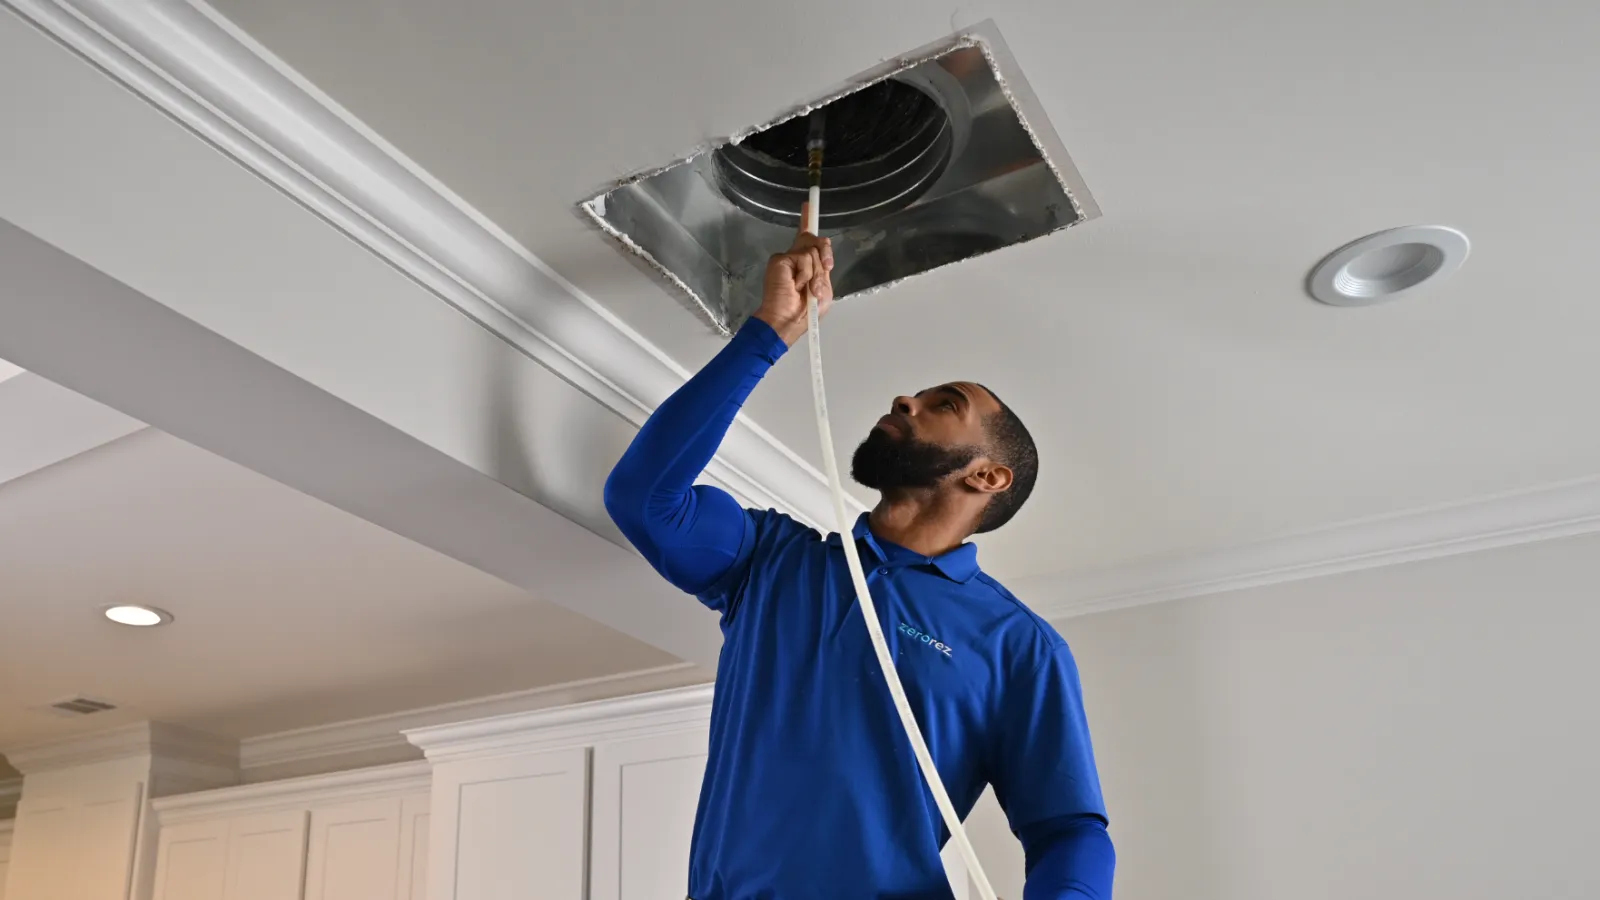 male Zerorez technician deep cleaning the HVAC system in the ceiling of a home to help remove musty smells from air ducts